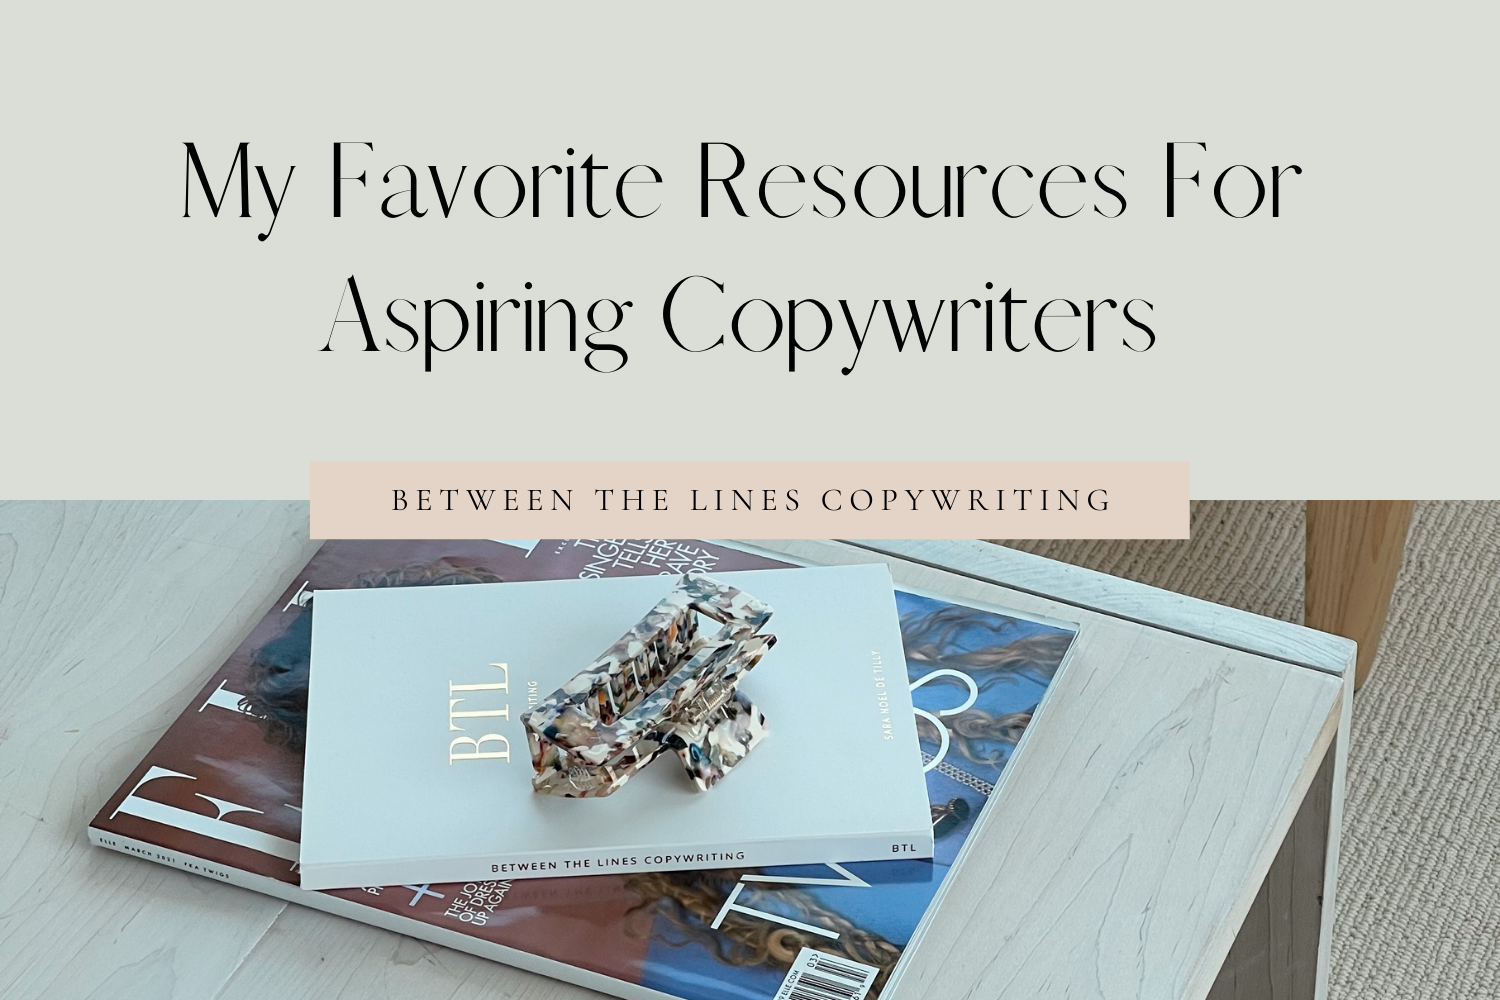 So, You Want To Become A Freelance Copywriter? Start Here!